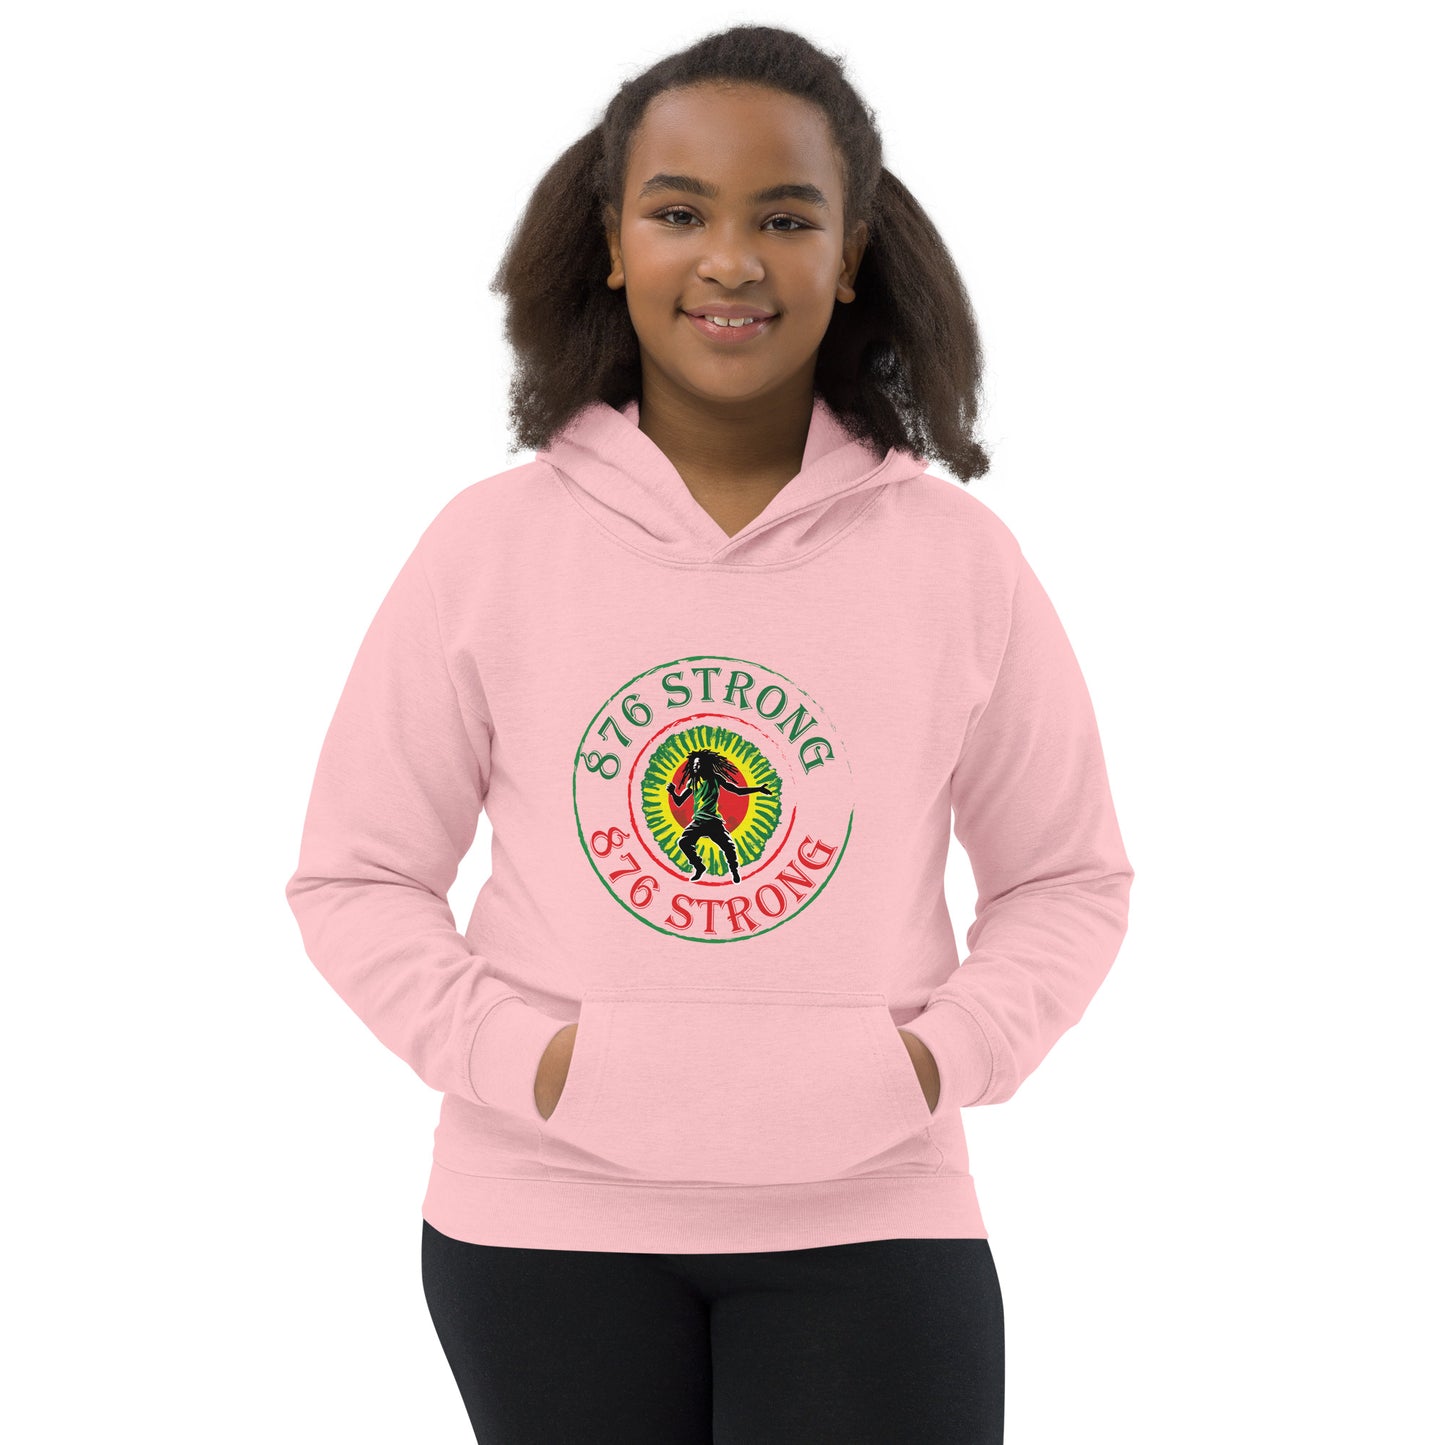 Youth "876 Strong" Hoodie